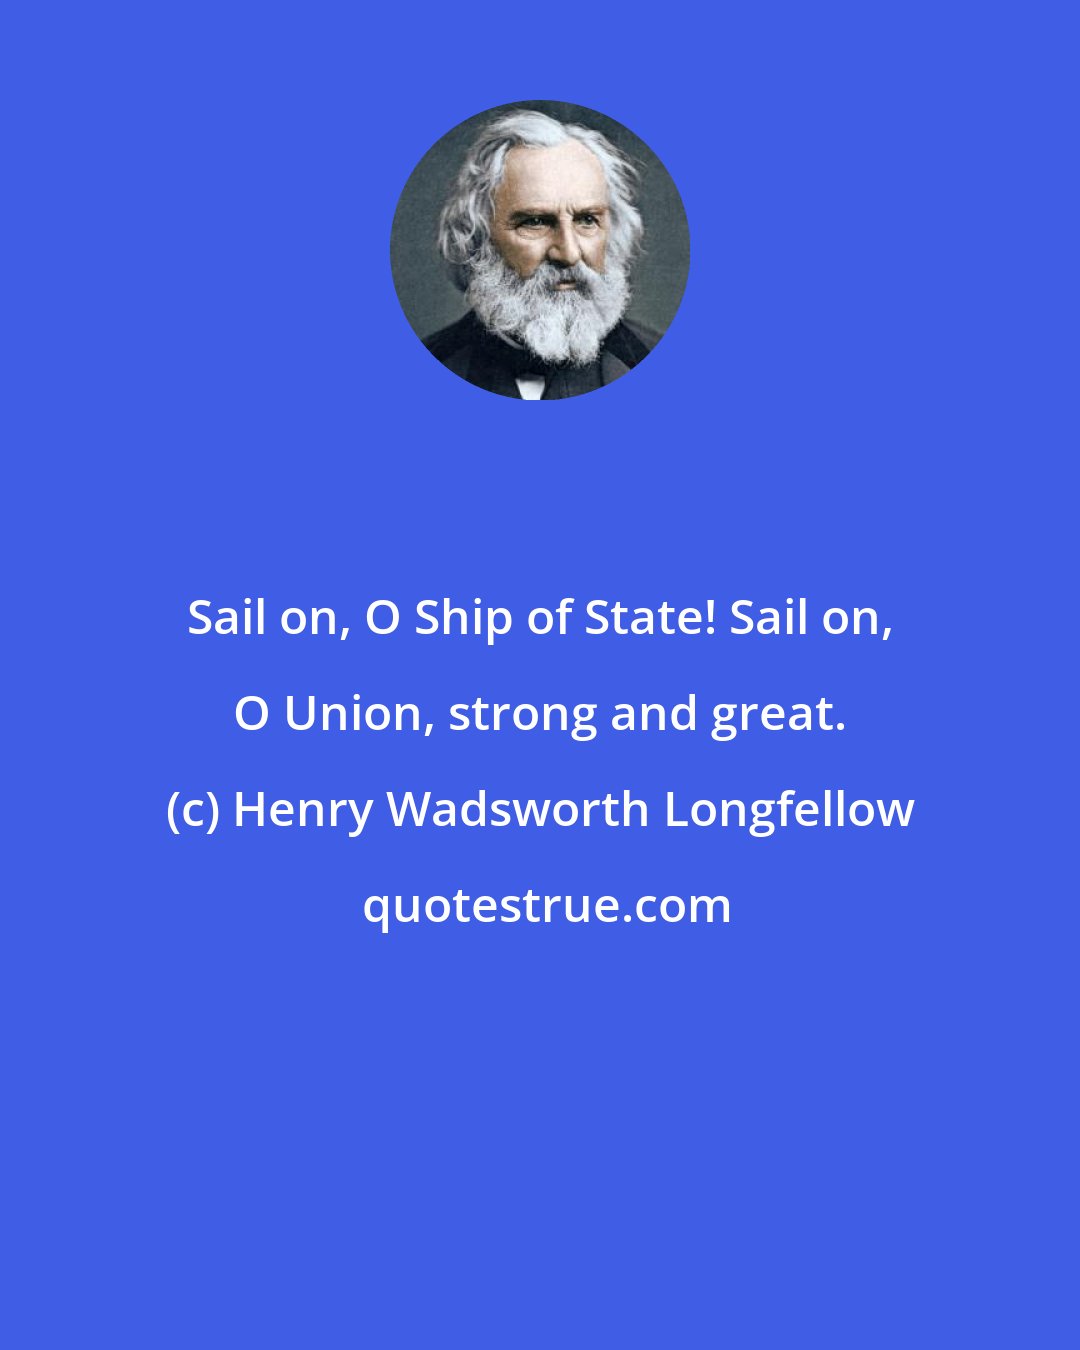 Henry Wadsworth Longfellow: Sail on, O Ship of State! Sail on, O Union, strong and great.